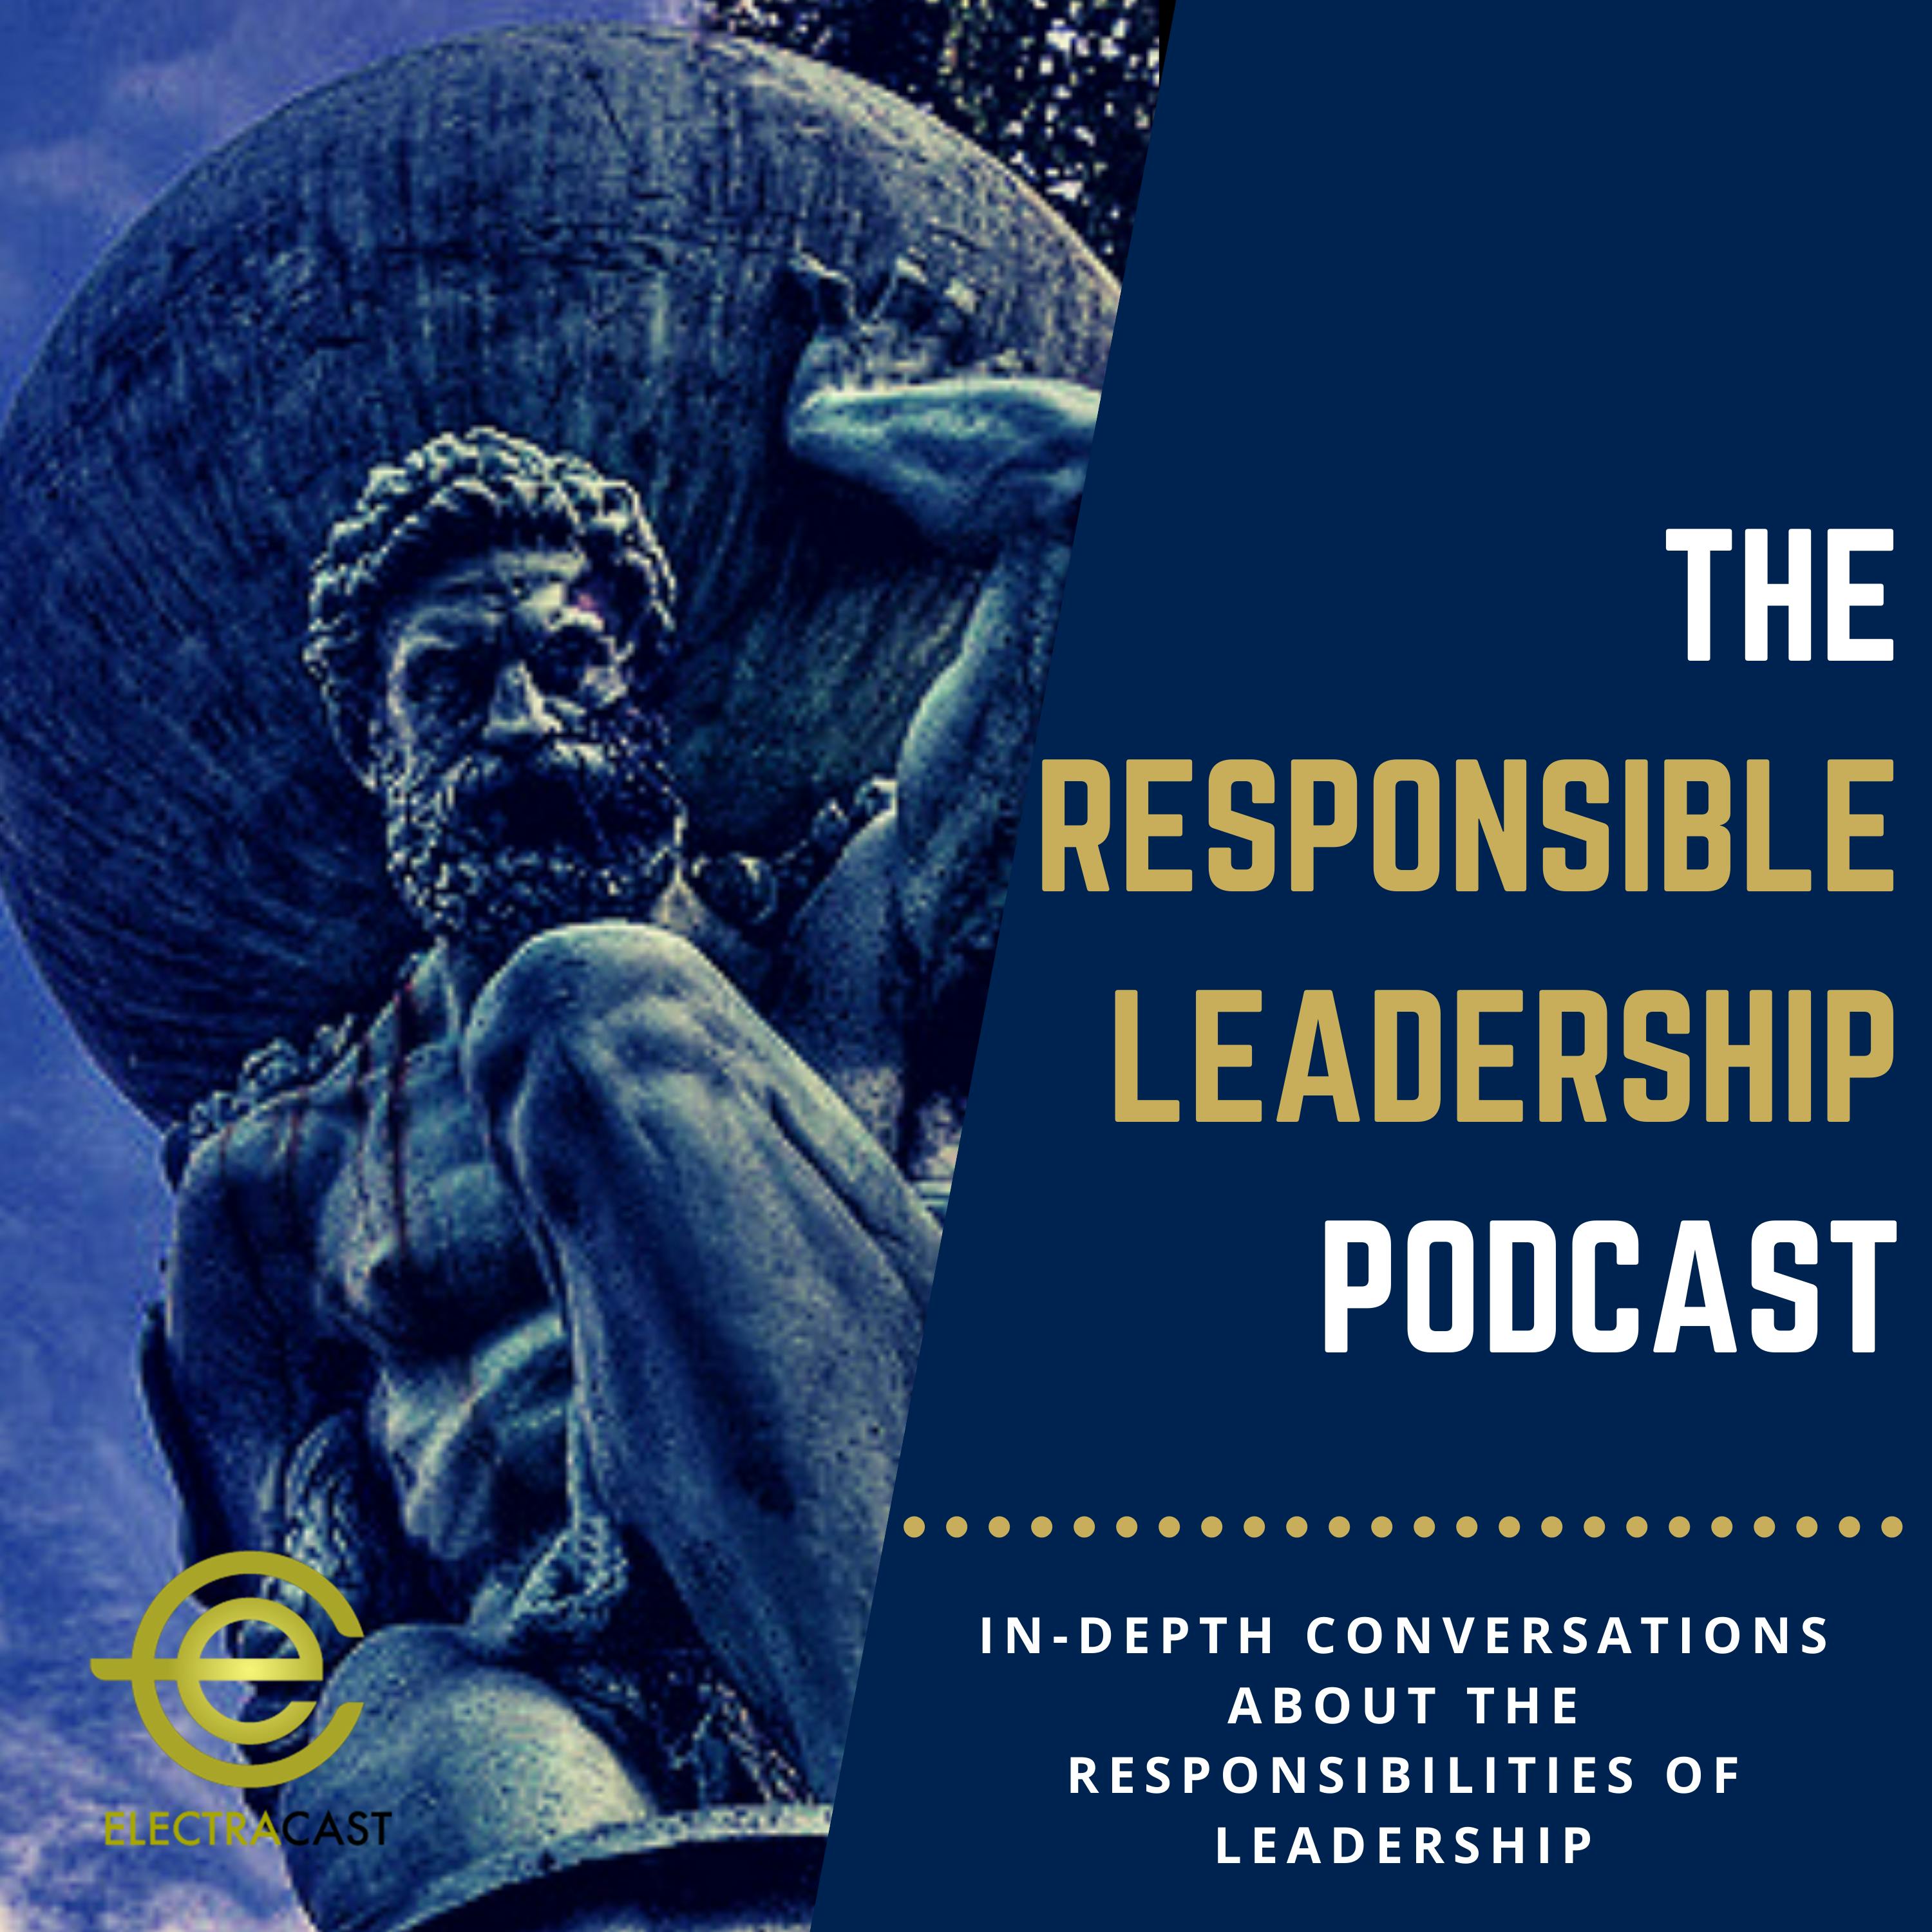 The Responsible Leadership Podcast